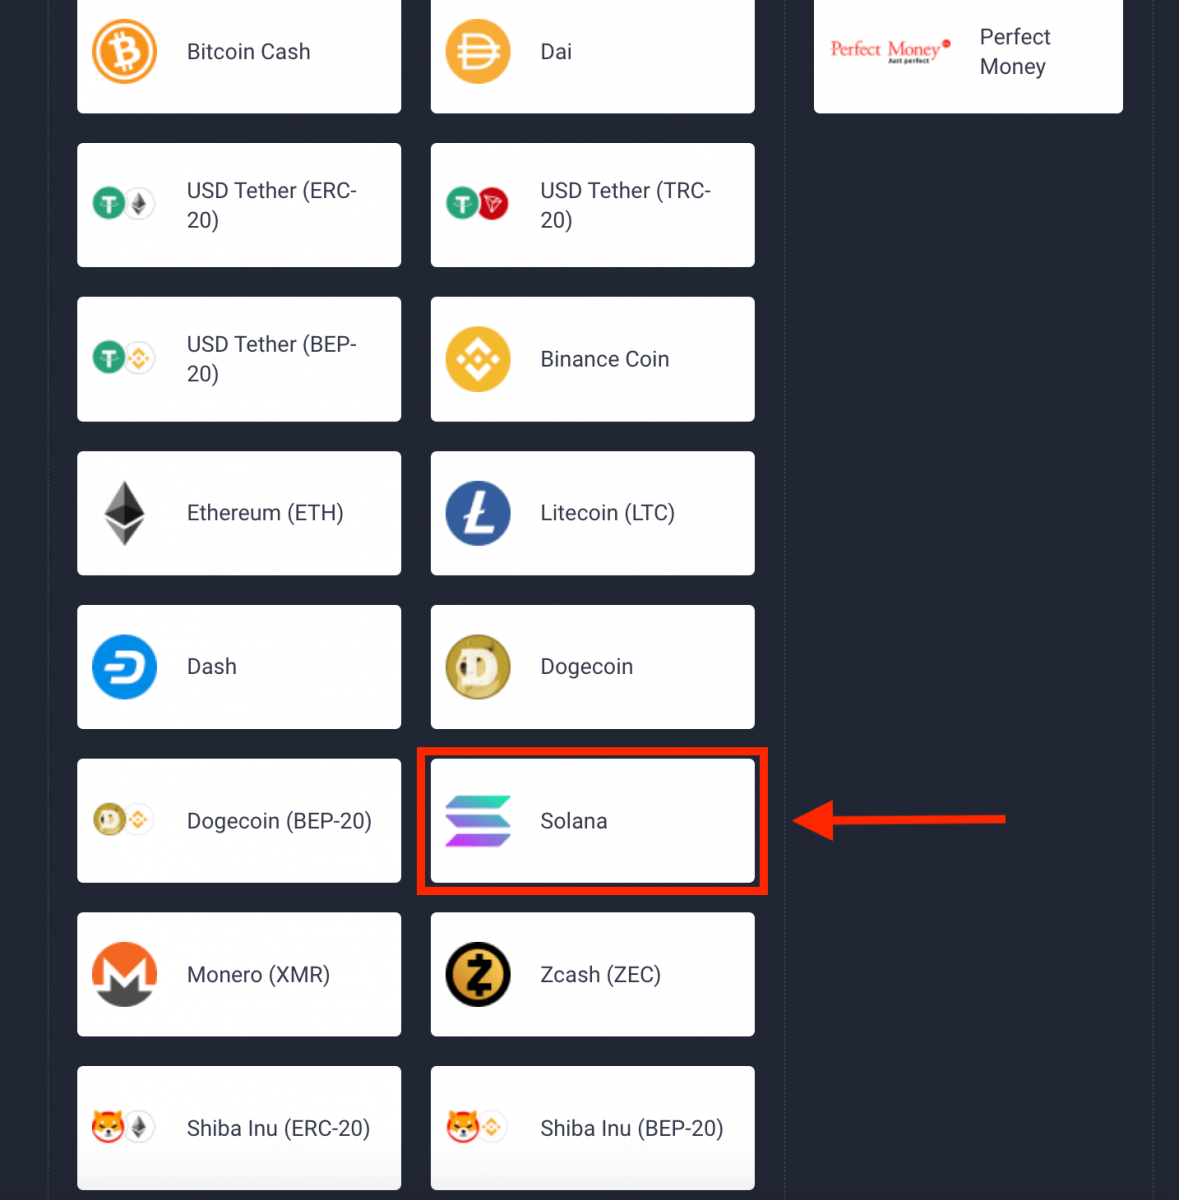 How to Deposit by Cryptocurrency in Quotex